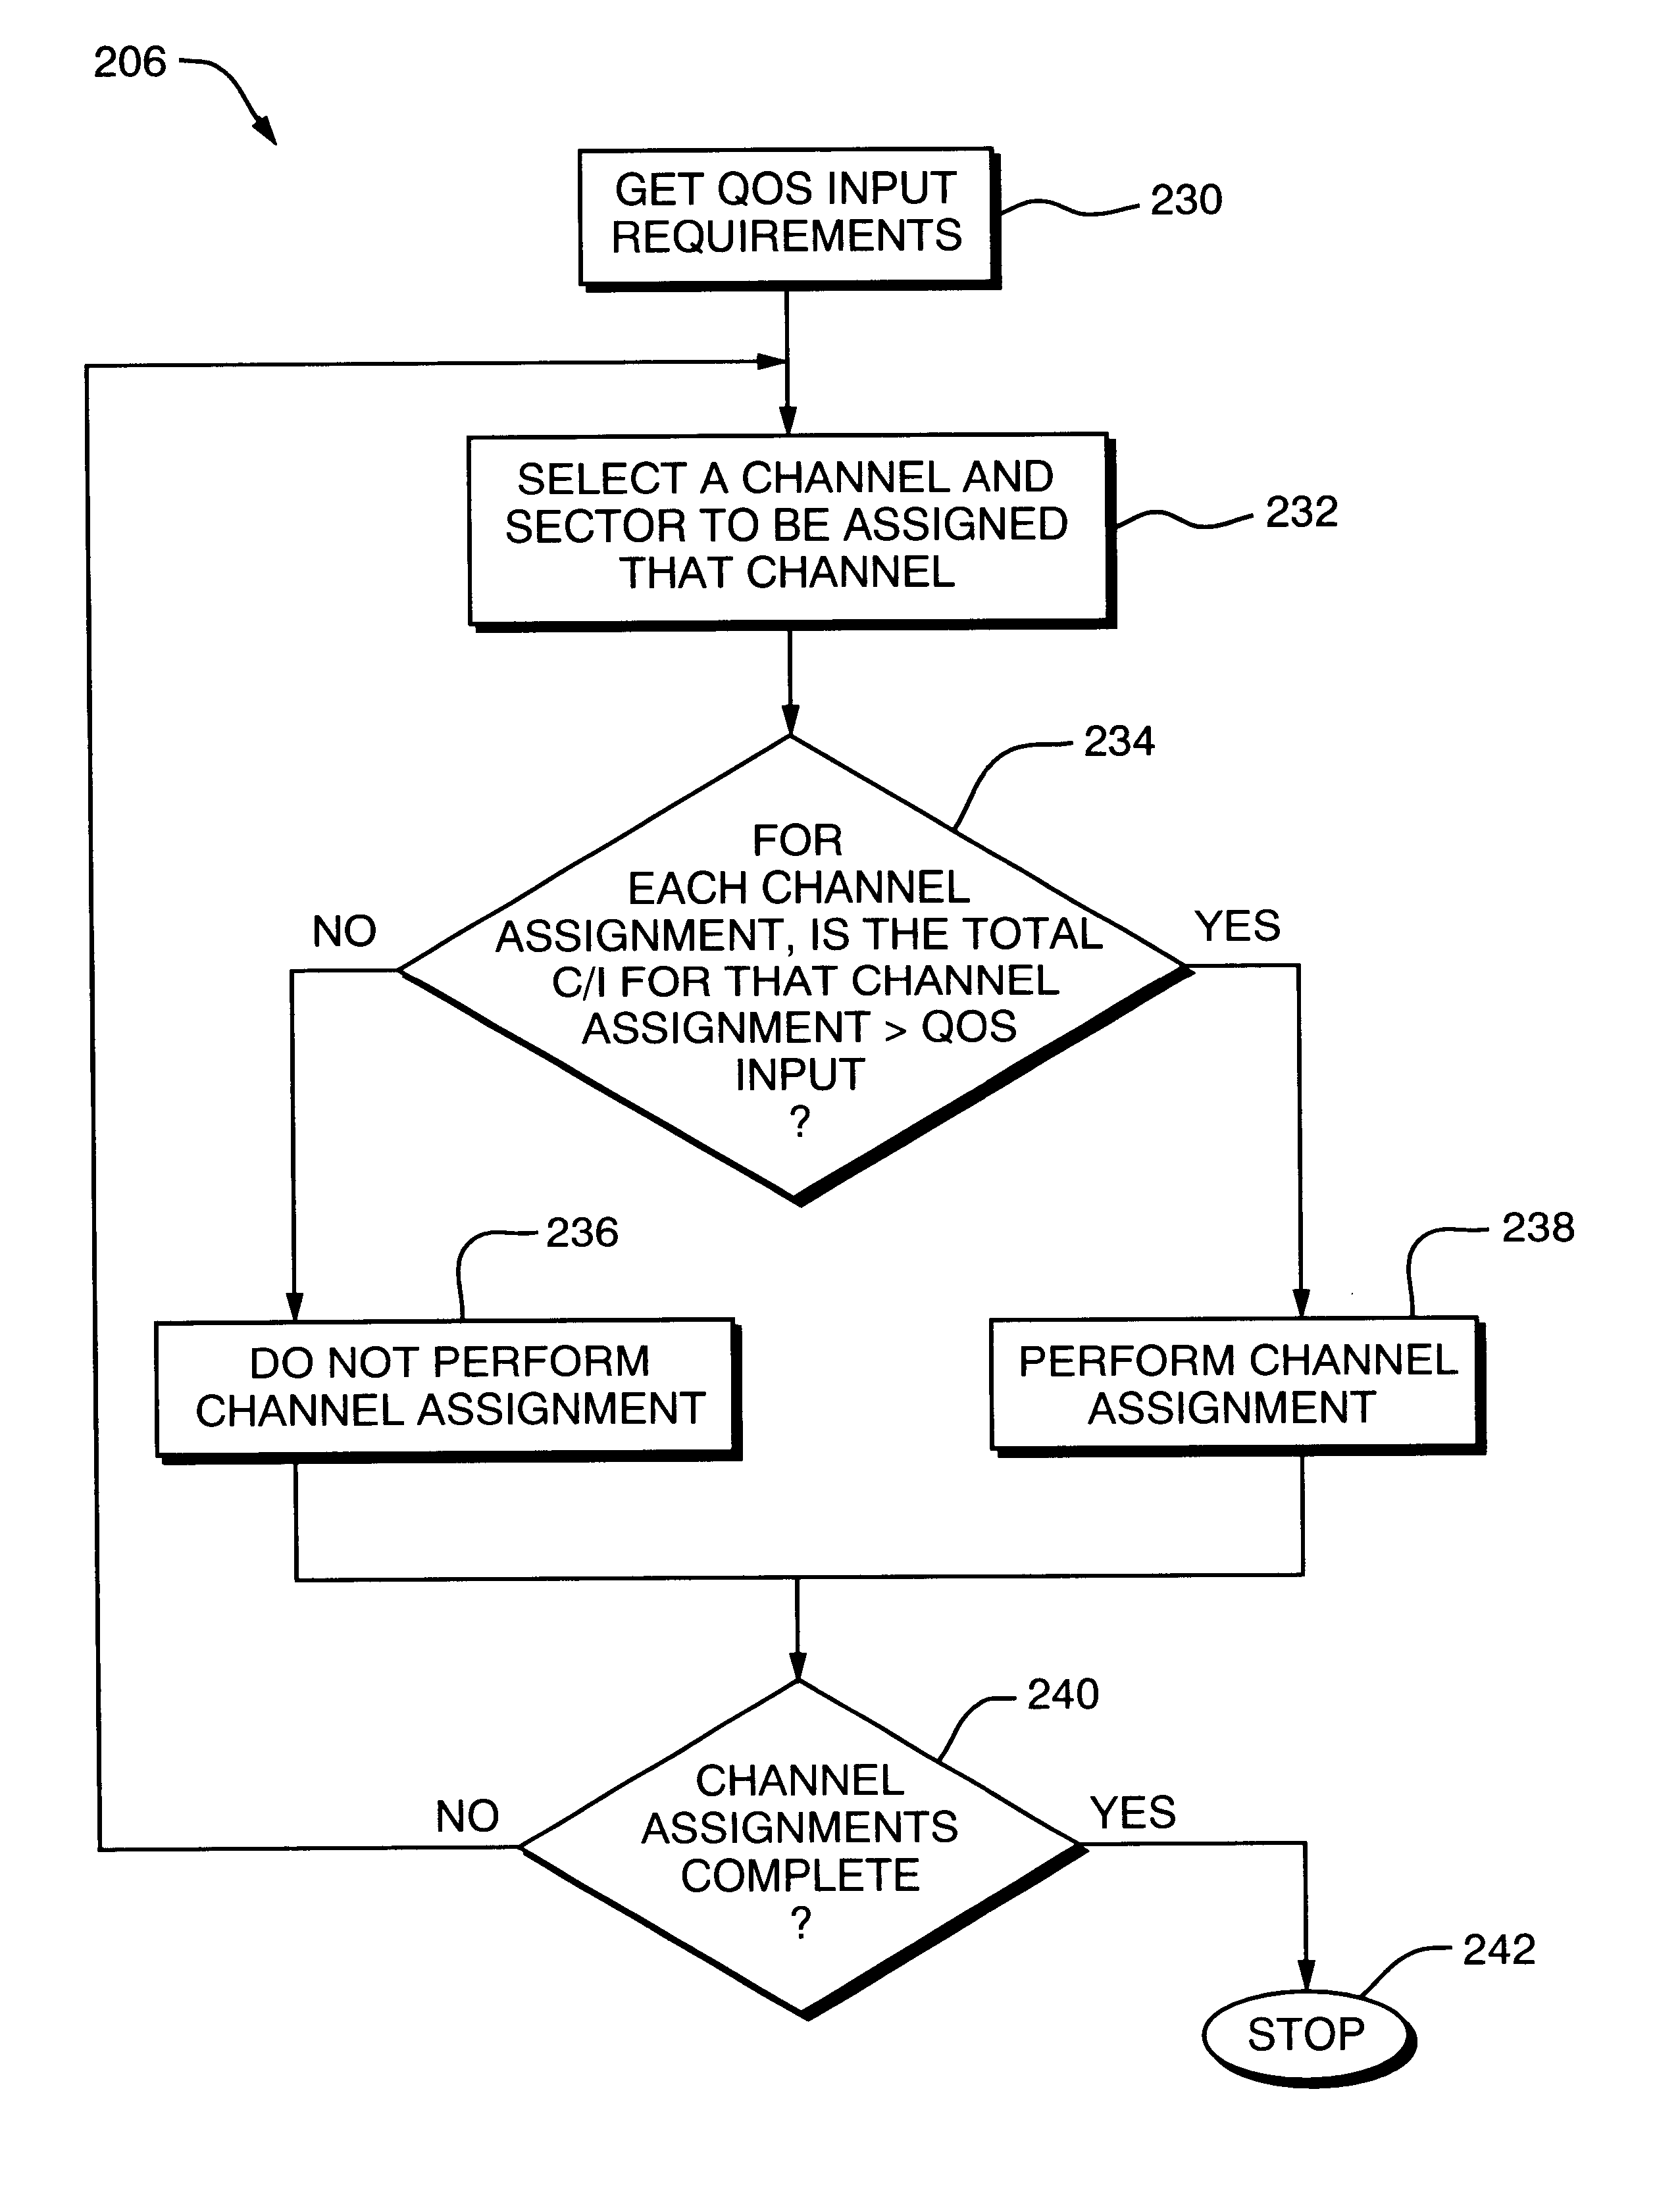 Methods and techniques in channel assignment in a cellular network